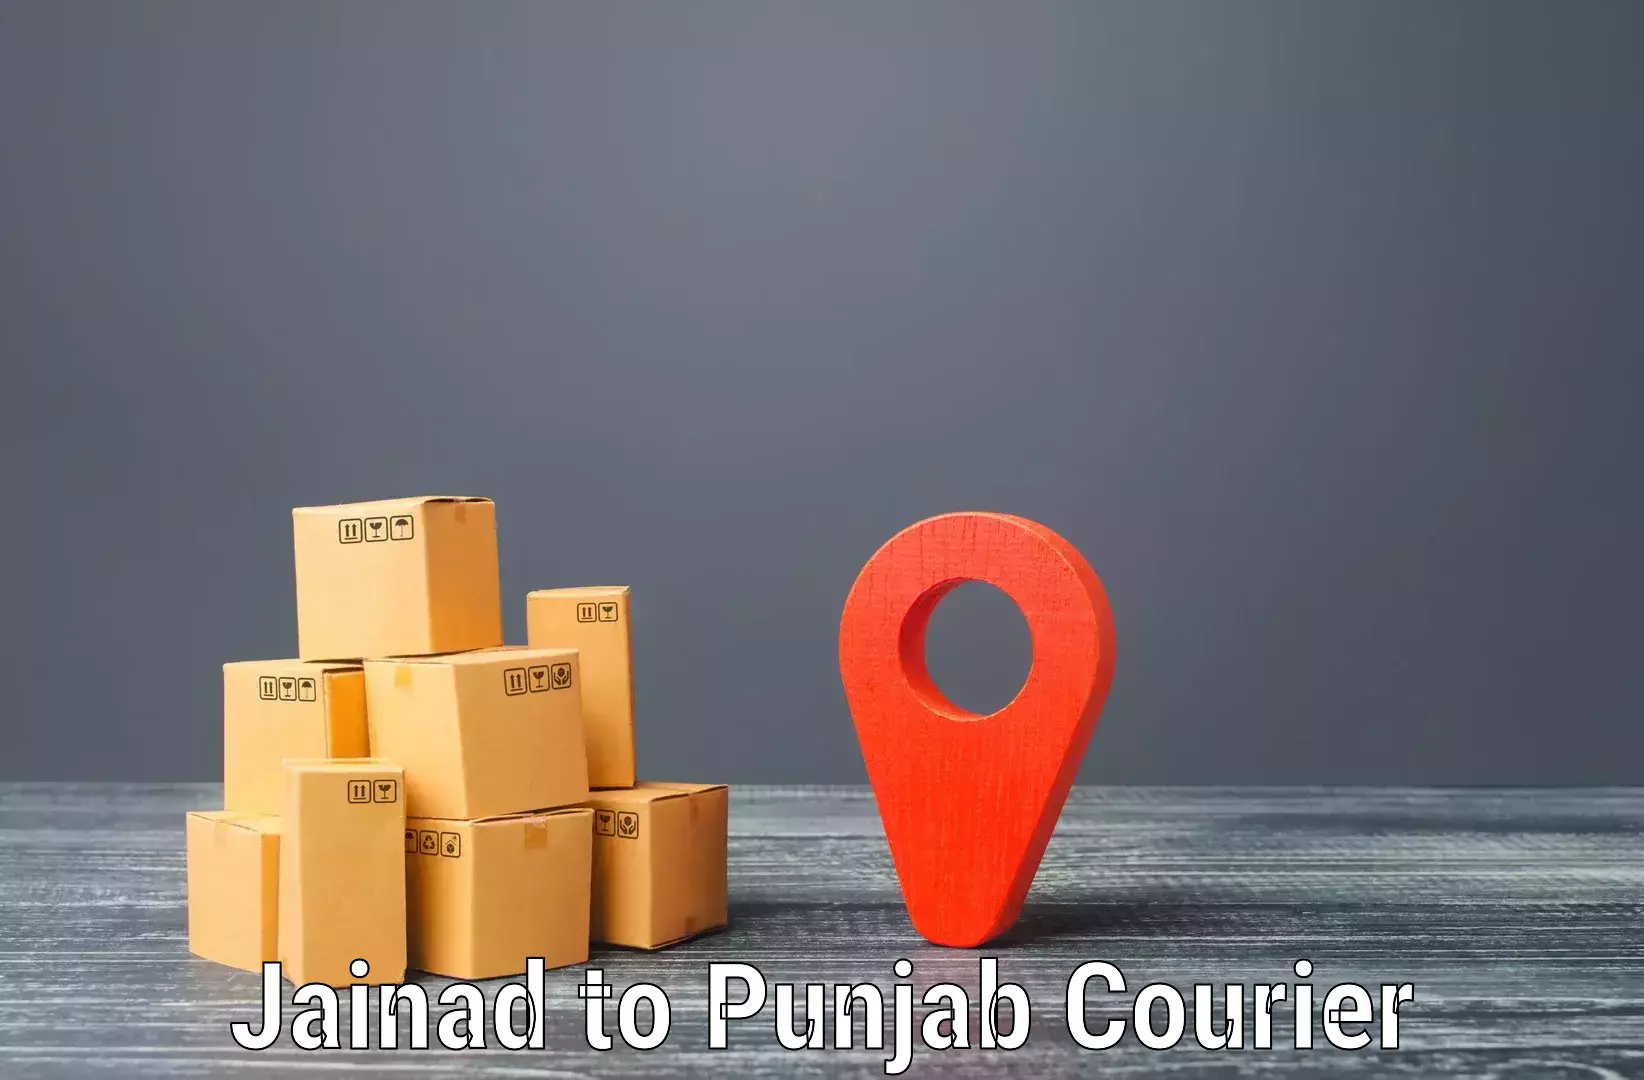 Affordable logistics services Jainad to Begowal